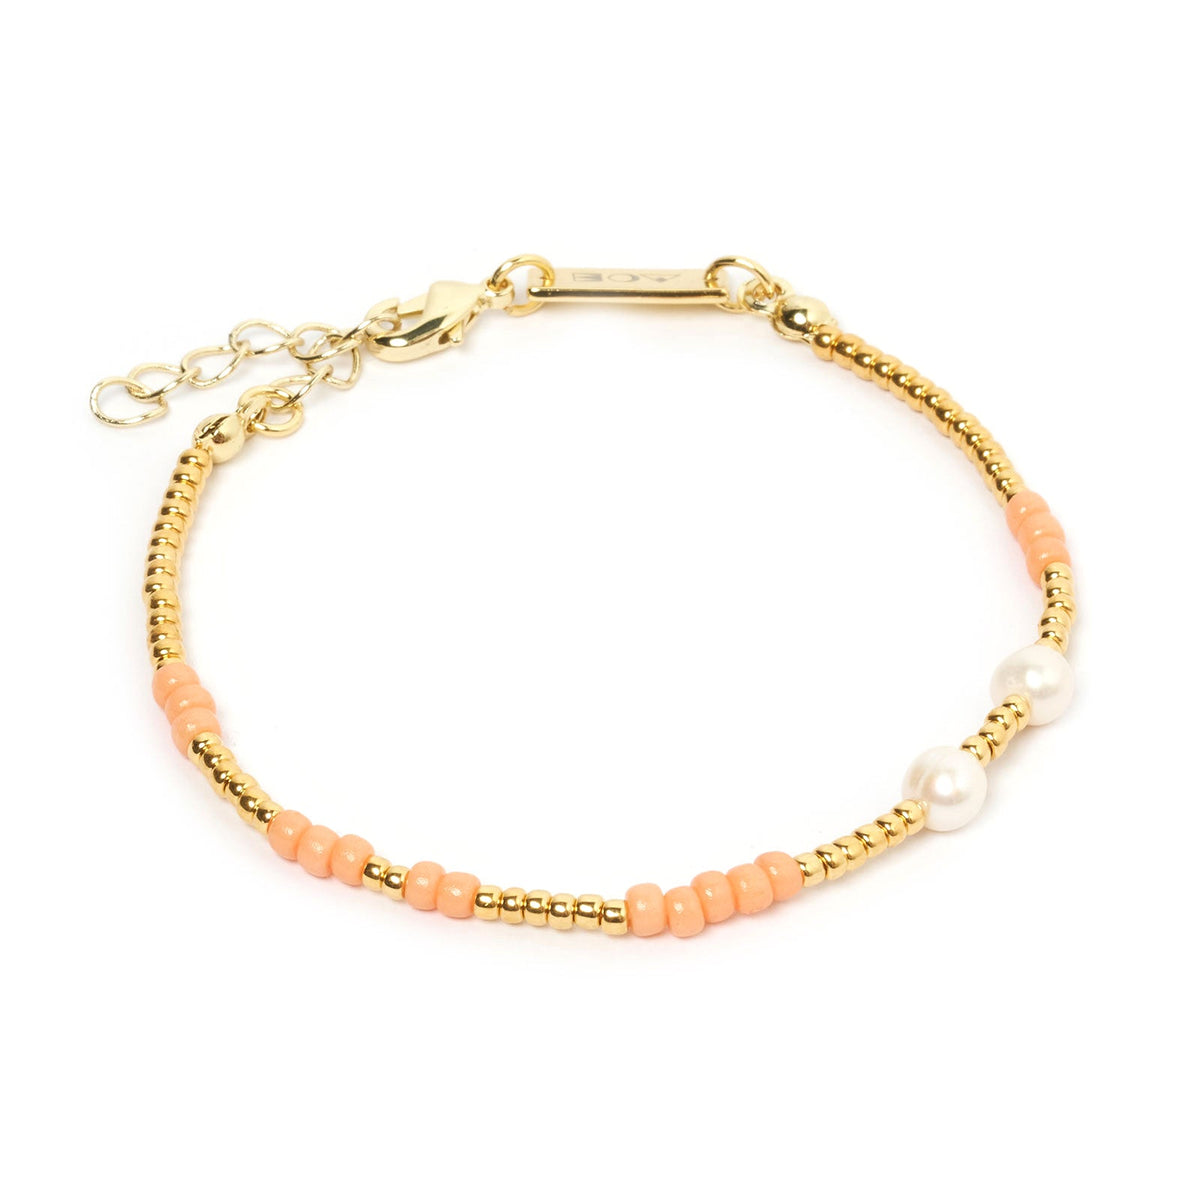 Arms of Eve Cabana Bead and Pearl Bracelet - Coral